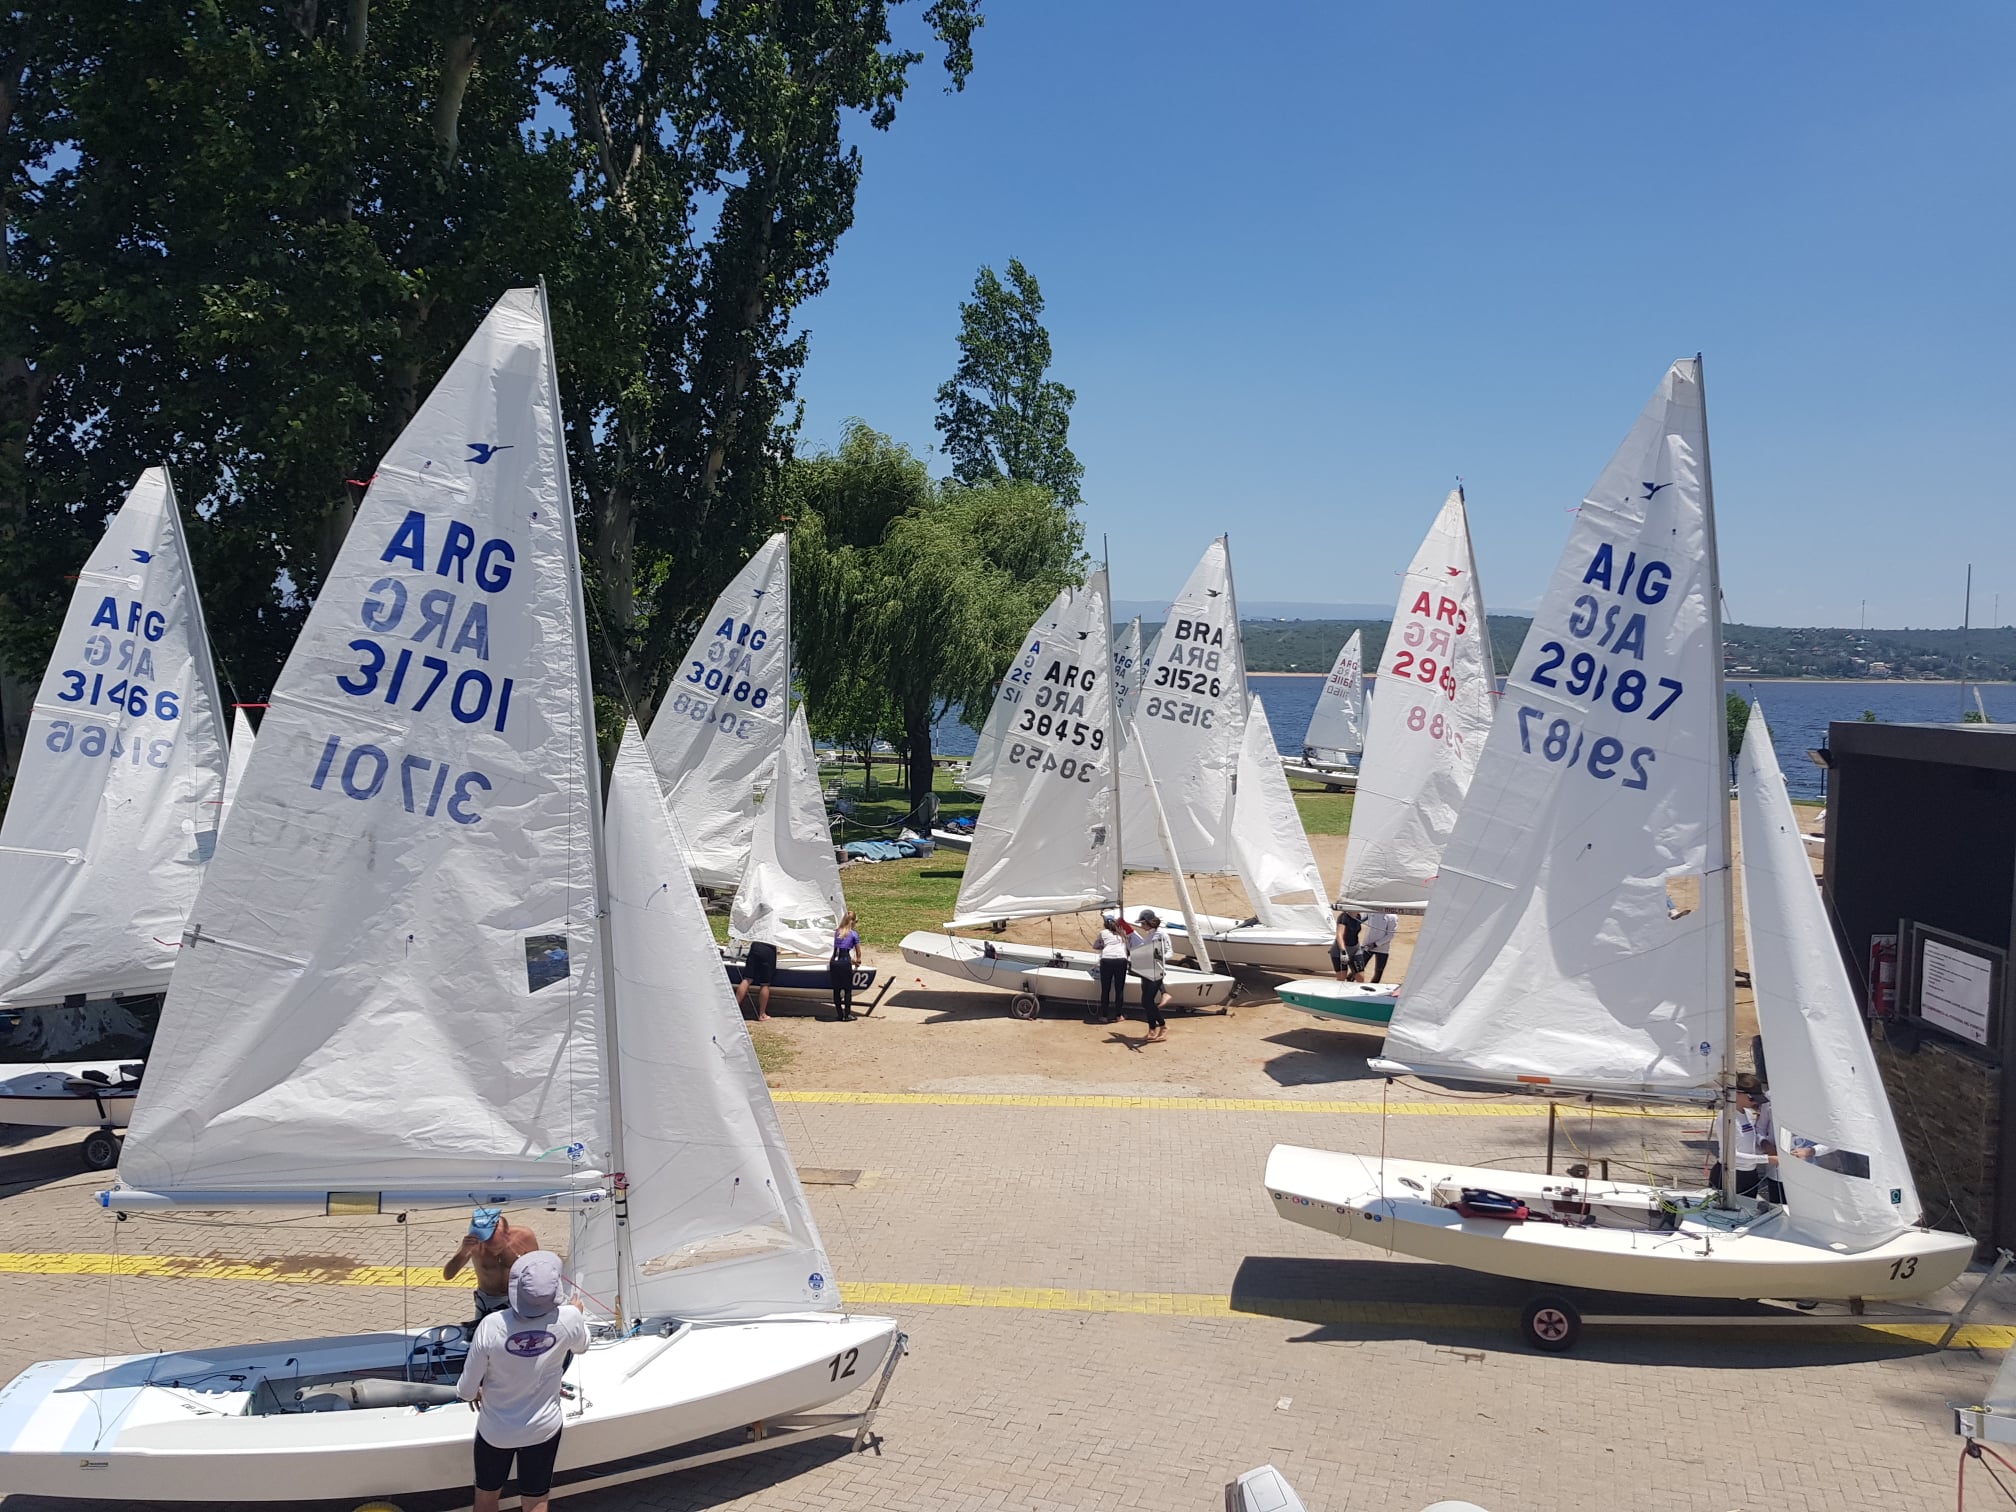 Argentinian Nationals – Day 3 Image